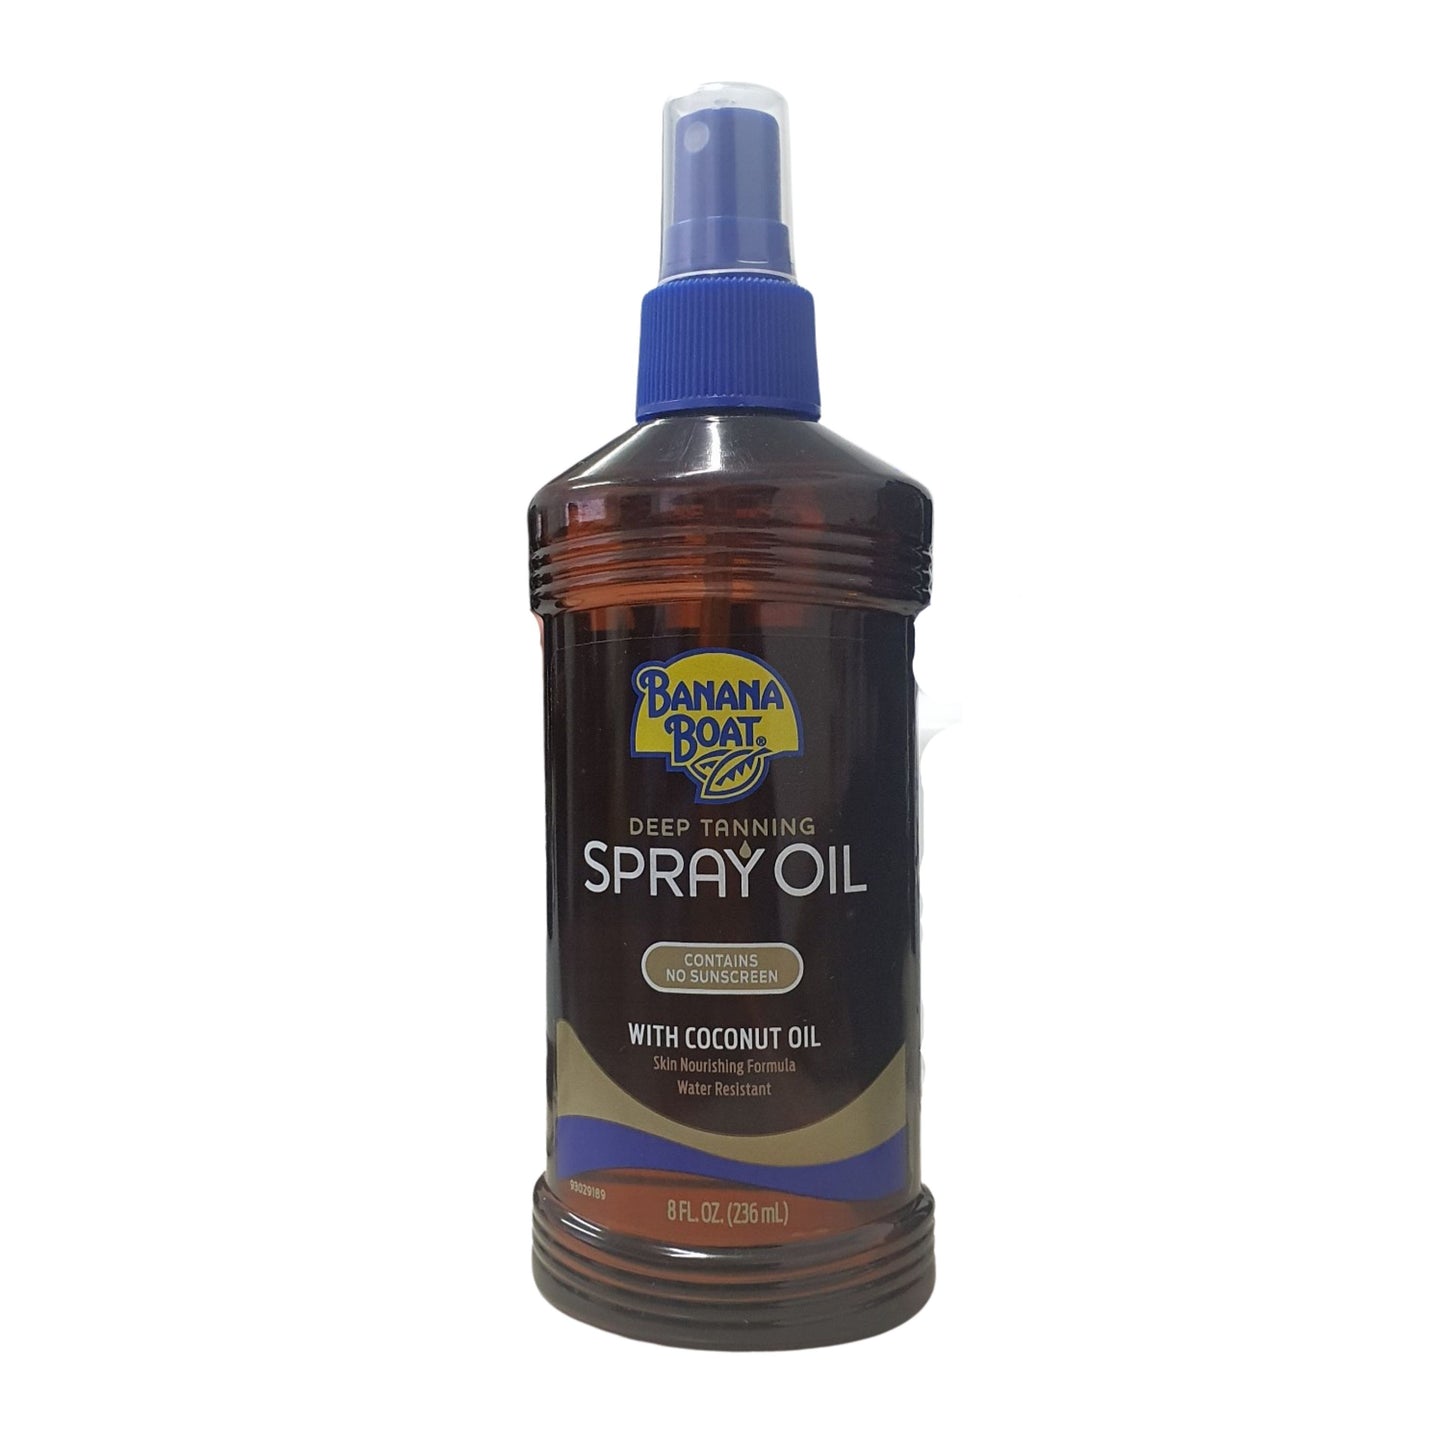 Banana Boat Deep Tanning Spray Oil with Coconut Oil ContainsNoSunscreen Skin Nourishing 8fl.oz.236mL